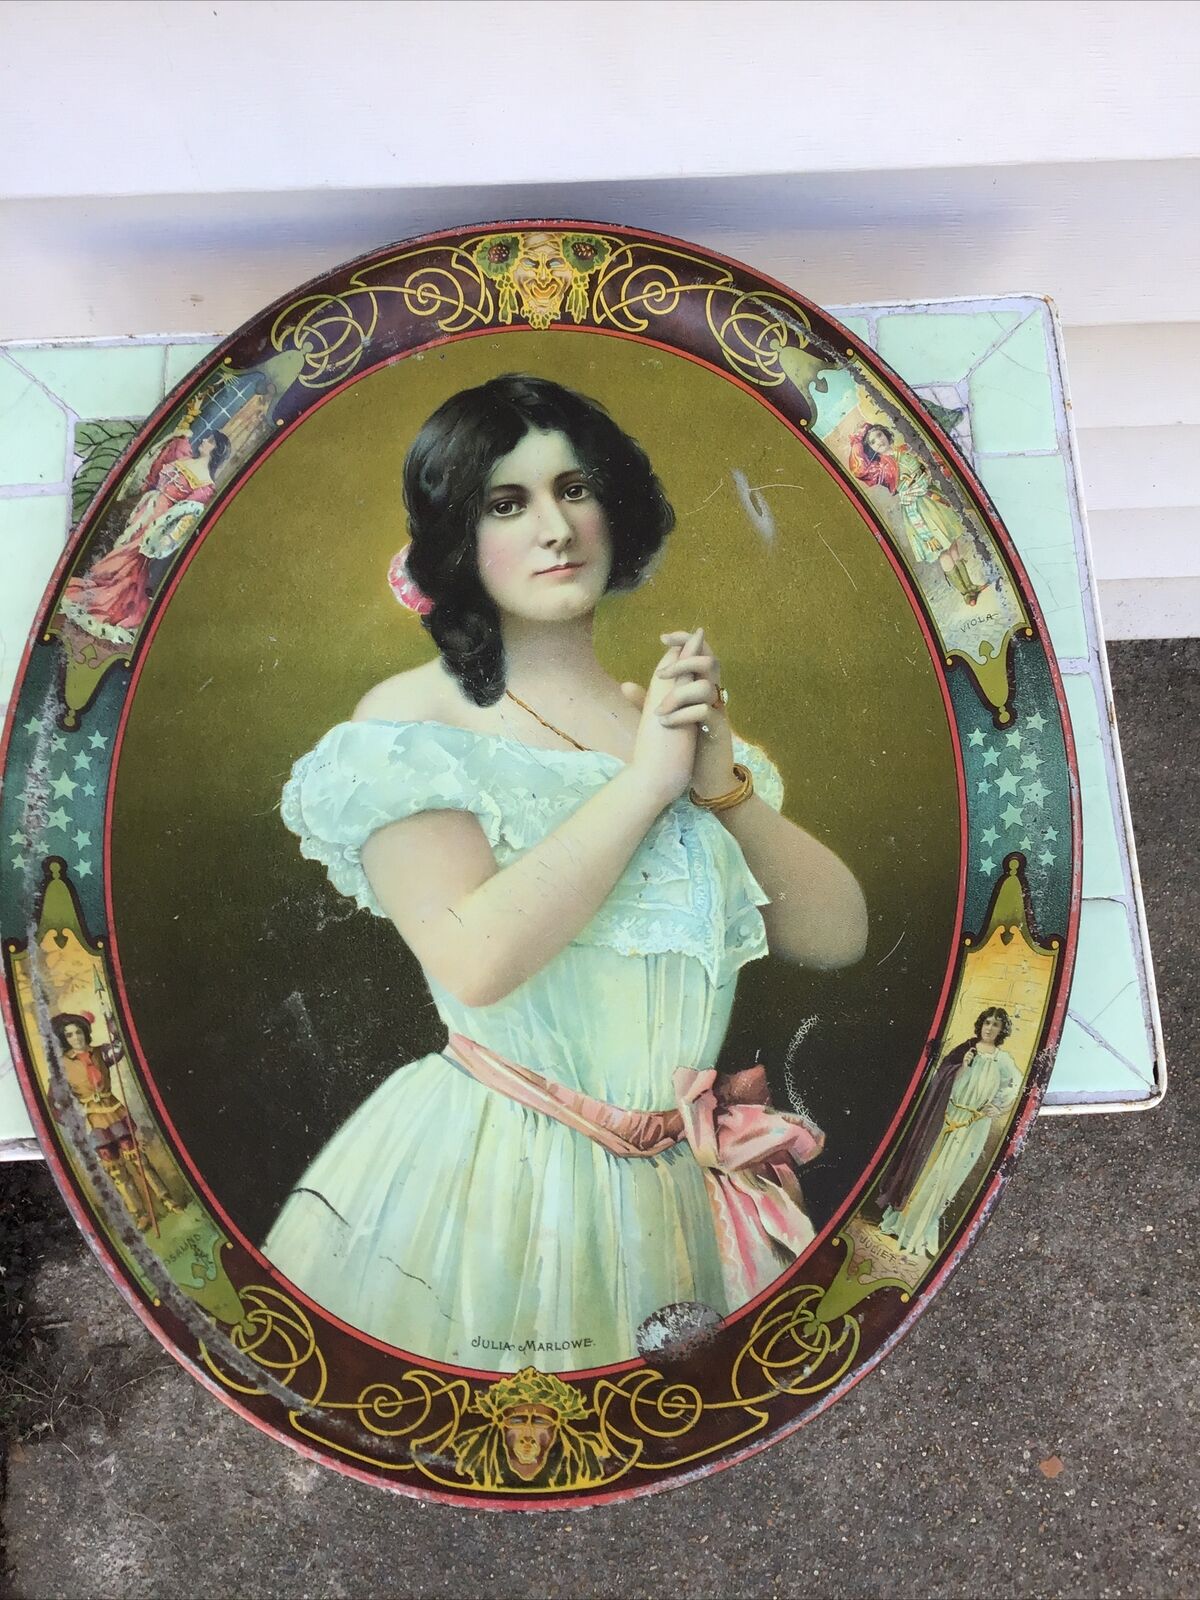 Antique Serving Tray depicting Actress Julia MarlowE